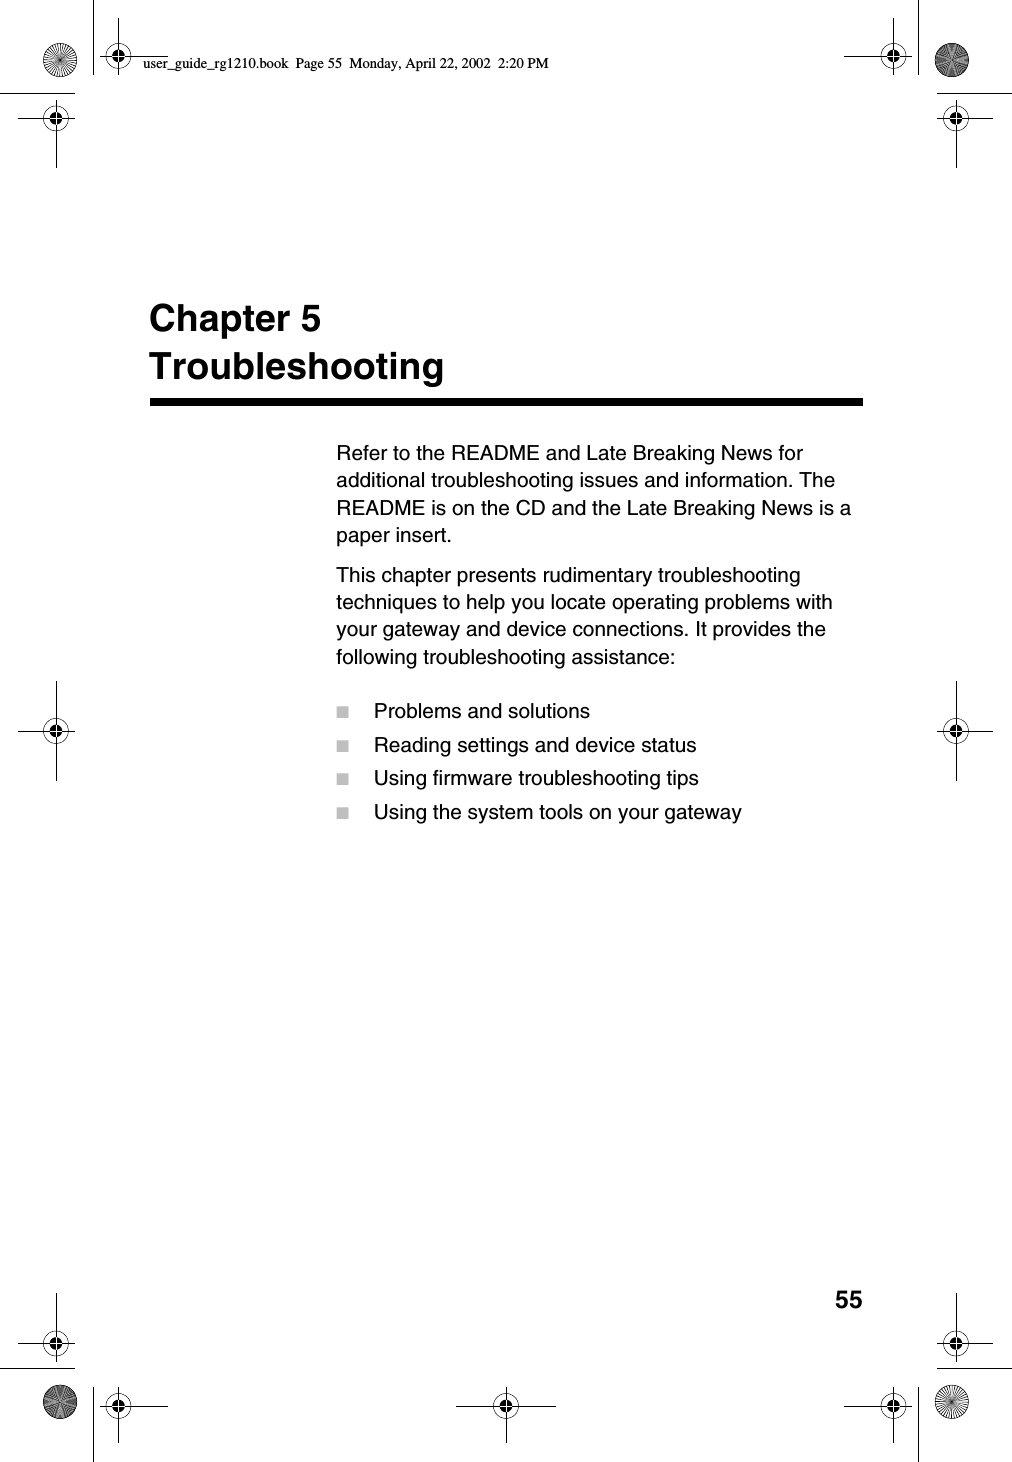 55Chapter 5TroubleshootingRefer to the README and Late Breaking News foradditional troubleshooting issues and information. TheREADME is on the CD and the Late Breaking News is apaper insert.This chapter presents rudimentary troubleshootingtechniques to help you locate operating problems withyour gateway and device connections. It provides thefollowing troubleshooting assistance:■Problems and solutions■Reading settings and device status■Using firmware troubleshooting tips■Using the system tools on your gatewayuser_guide_rg1210.book Page 55 Monday, April 22, 2002 2:20 PM